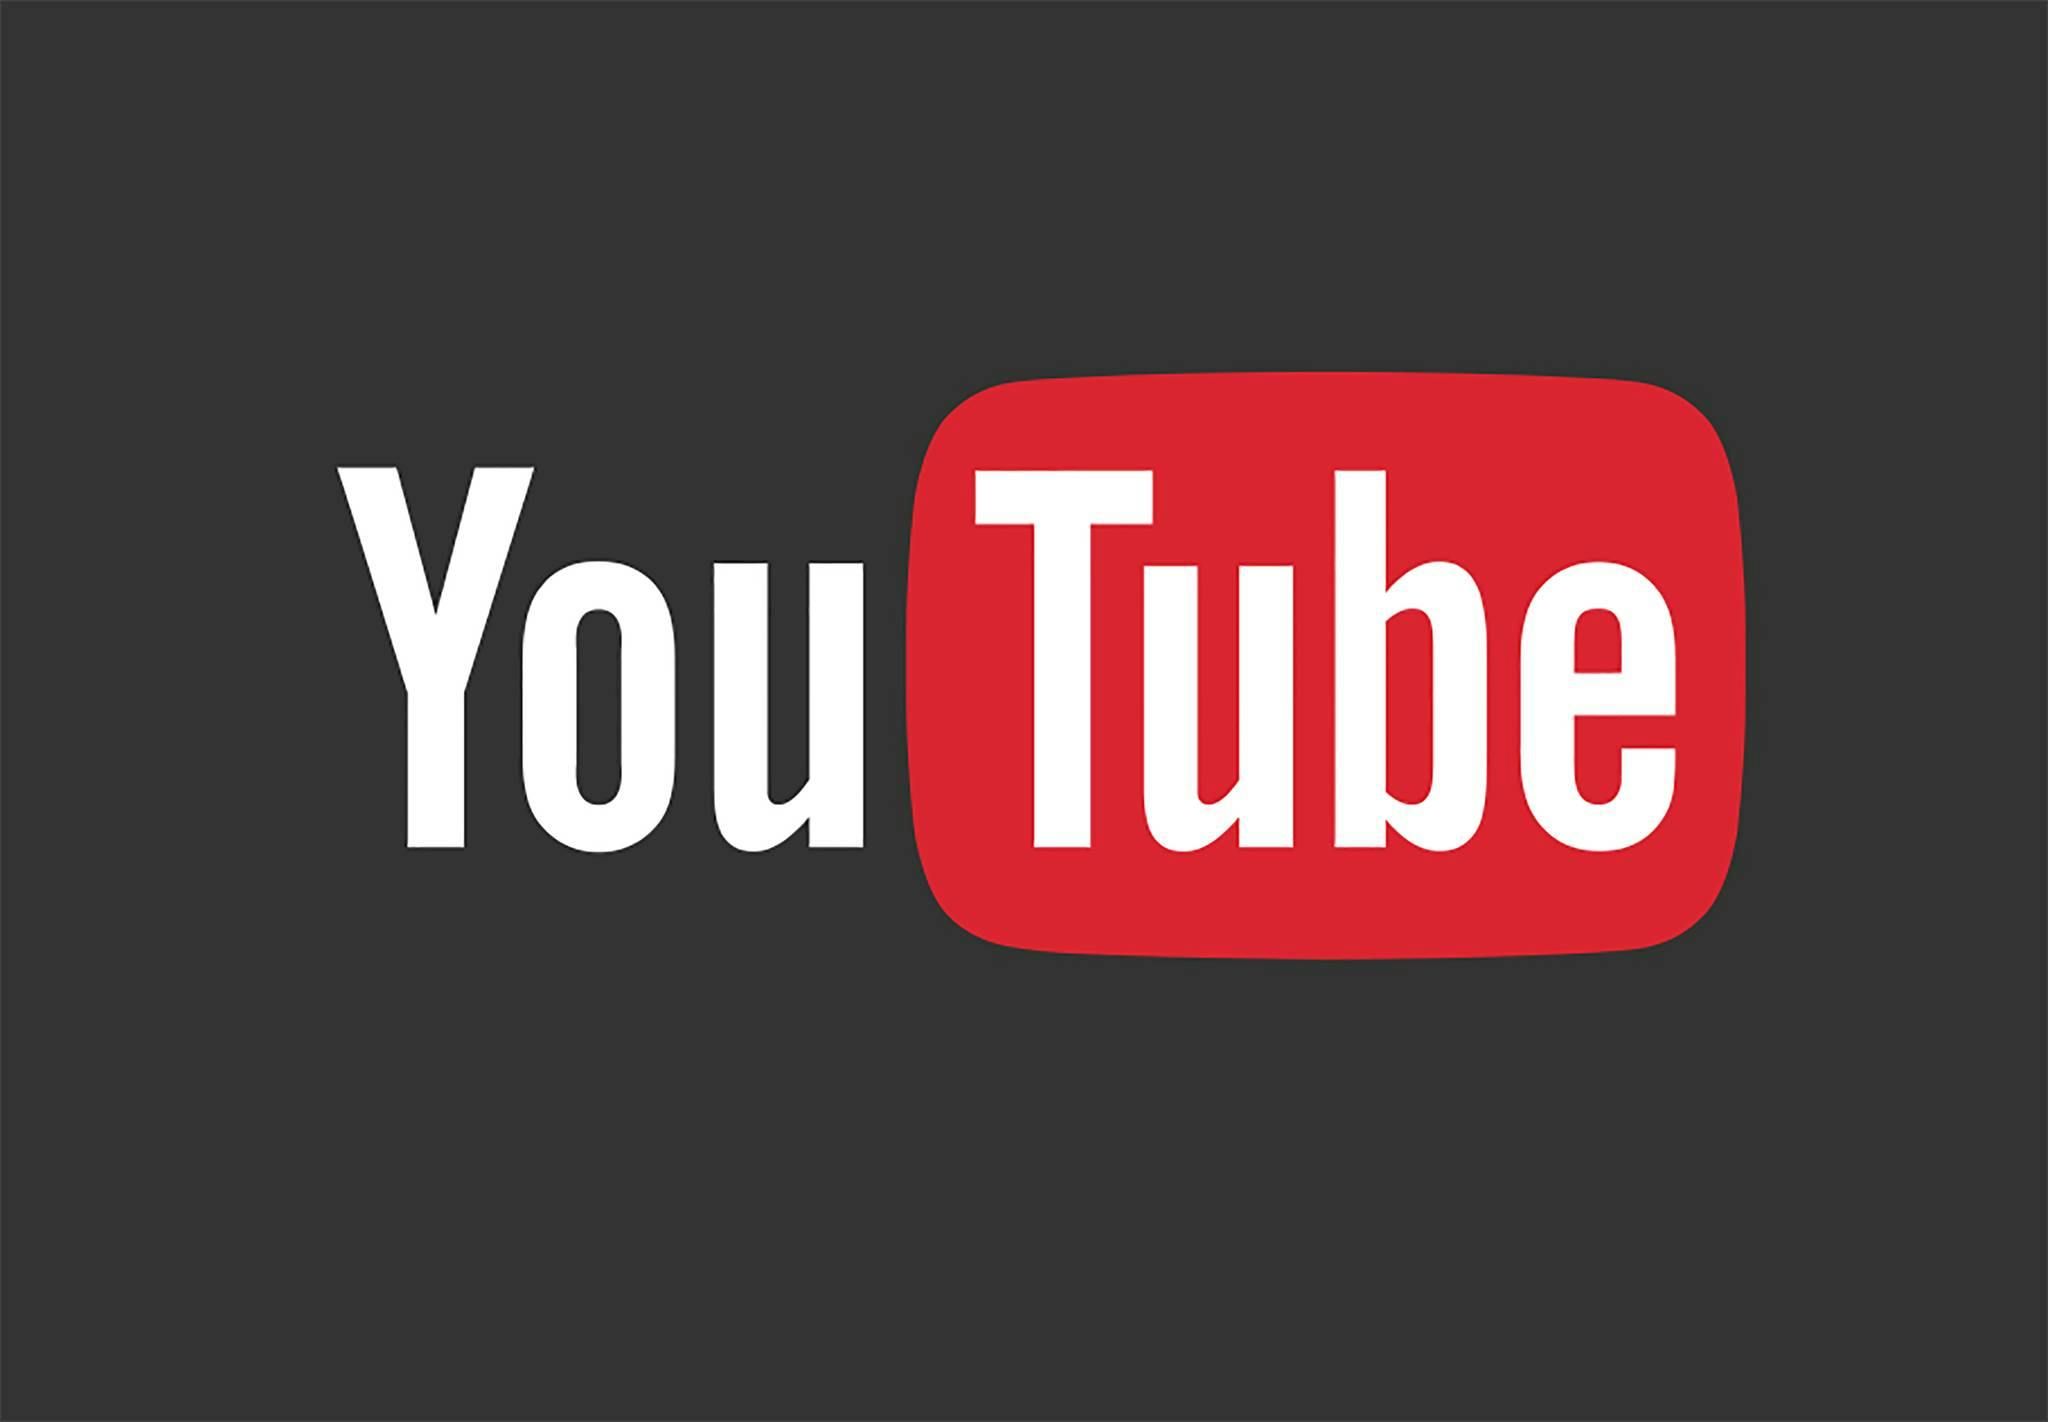 ESPN, ABC, and CBS may be joining YouTube's online TV service.